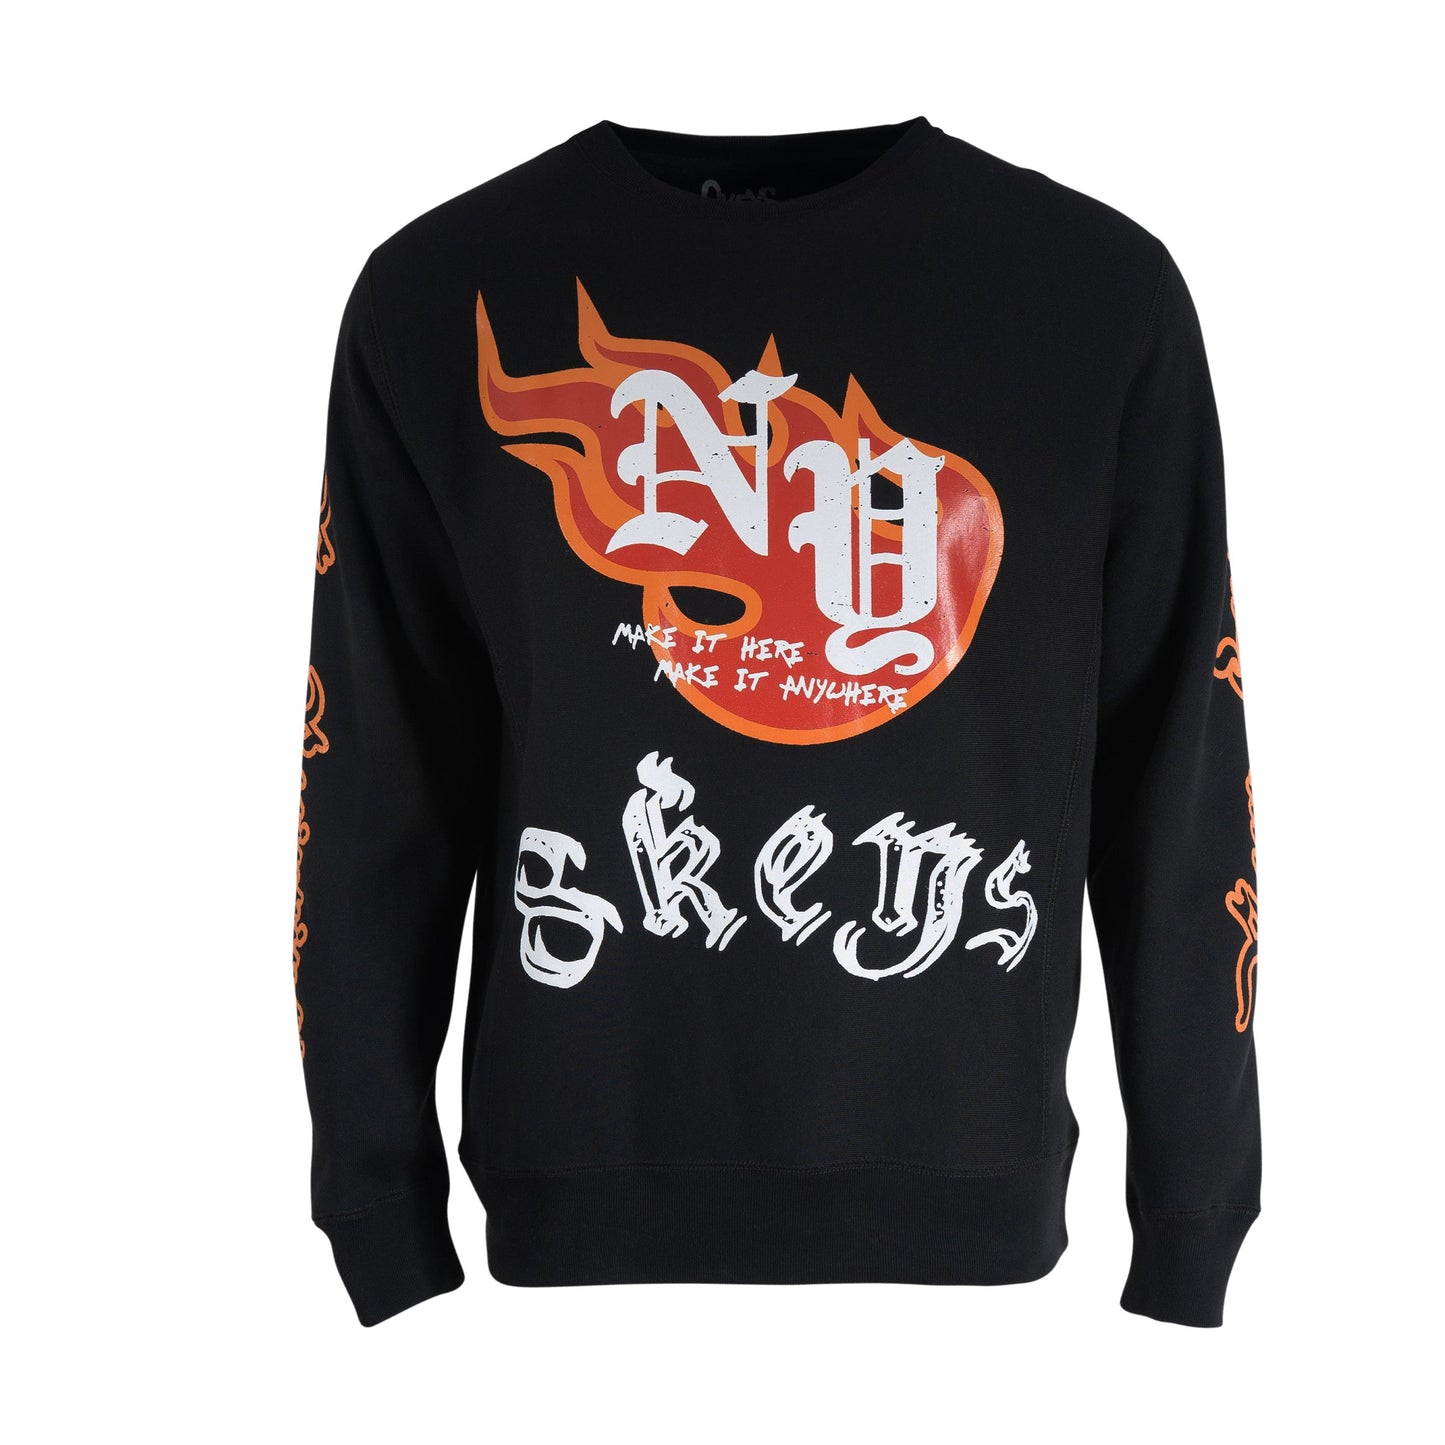 Black local only crewneck sweater